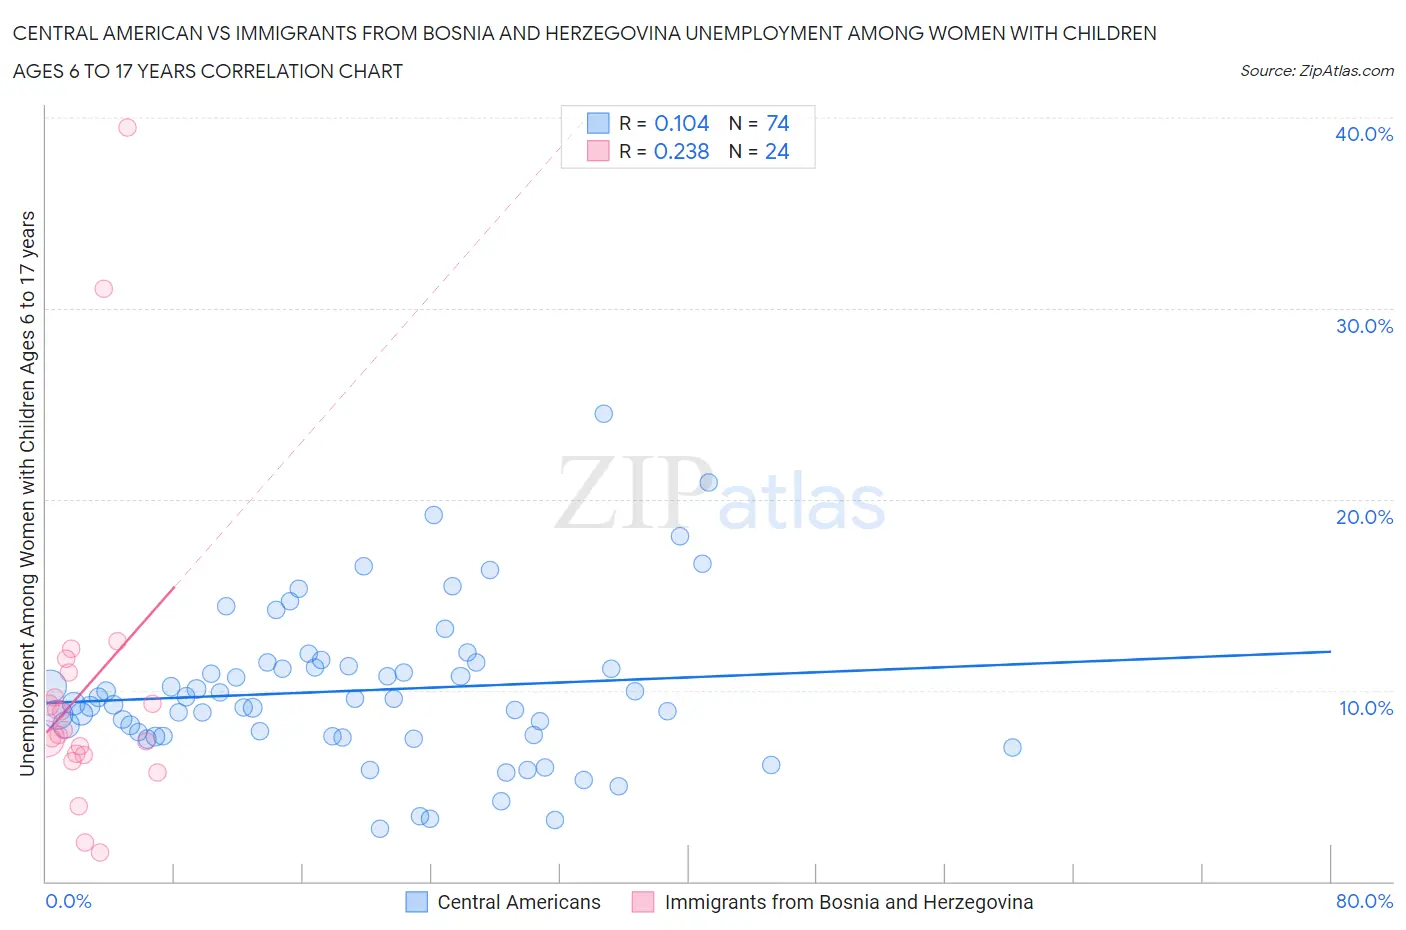 Central American vs Immigrants from Bosnia and Herzegovina Unemployment Among Women with Children Ages 6 to 17 years